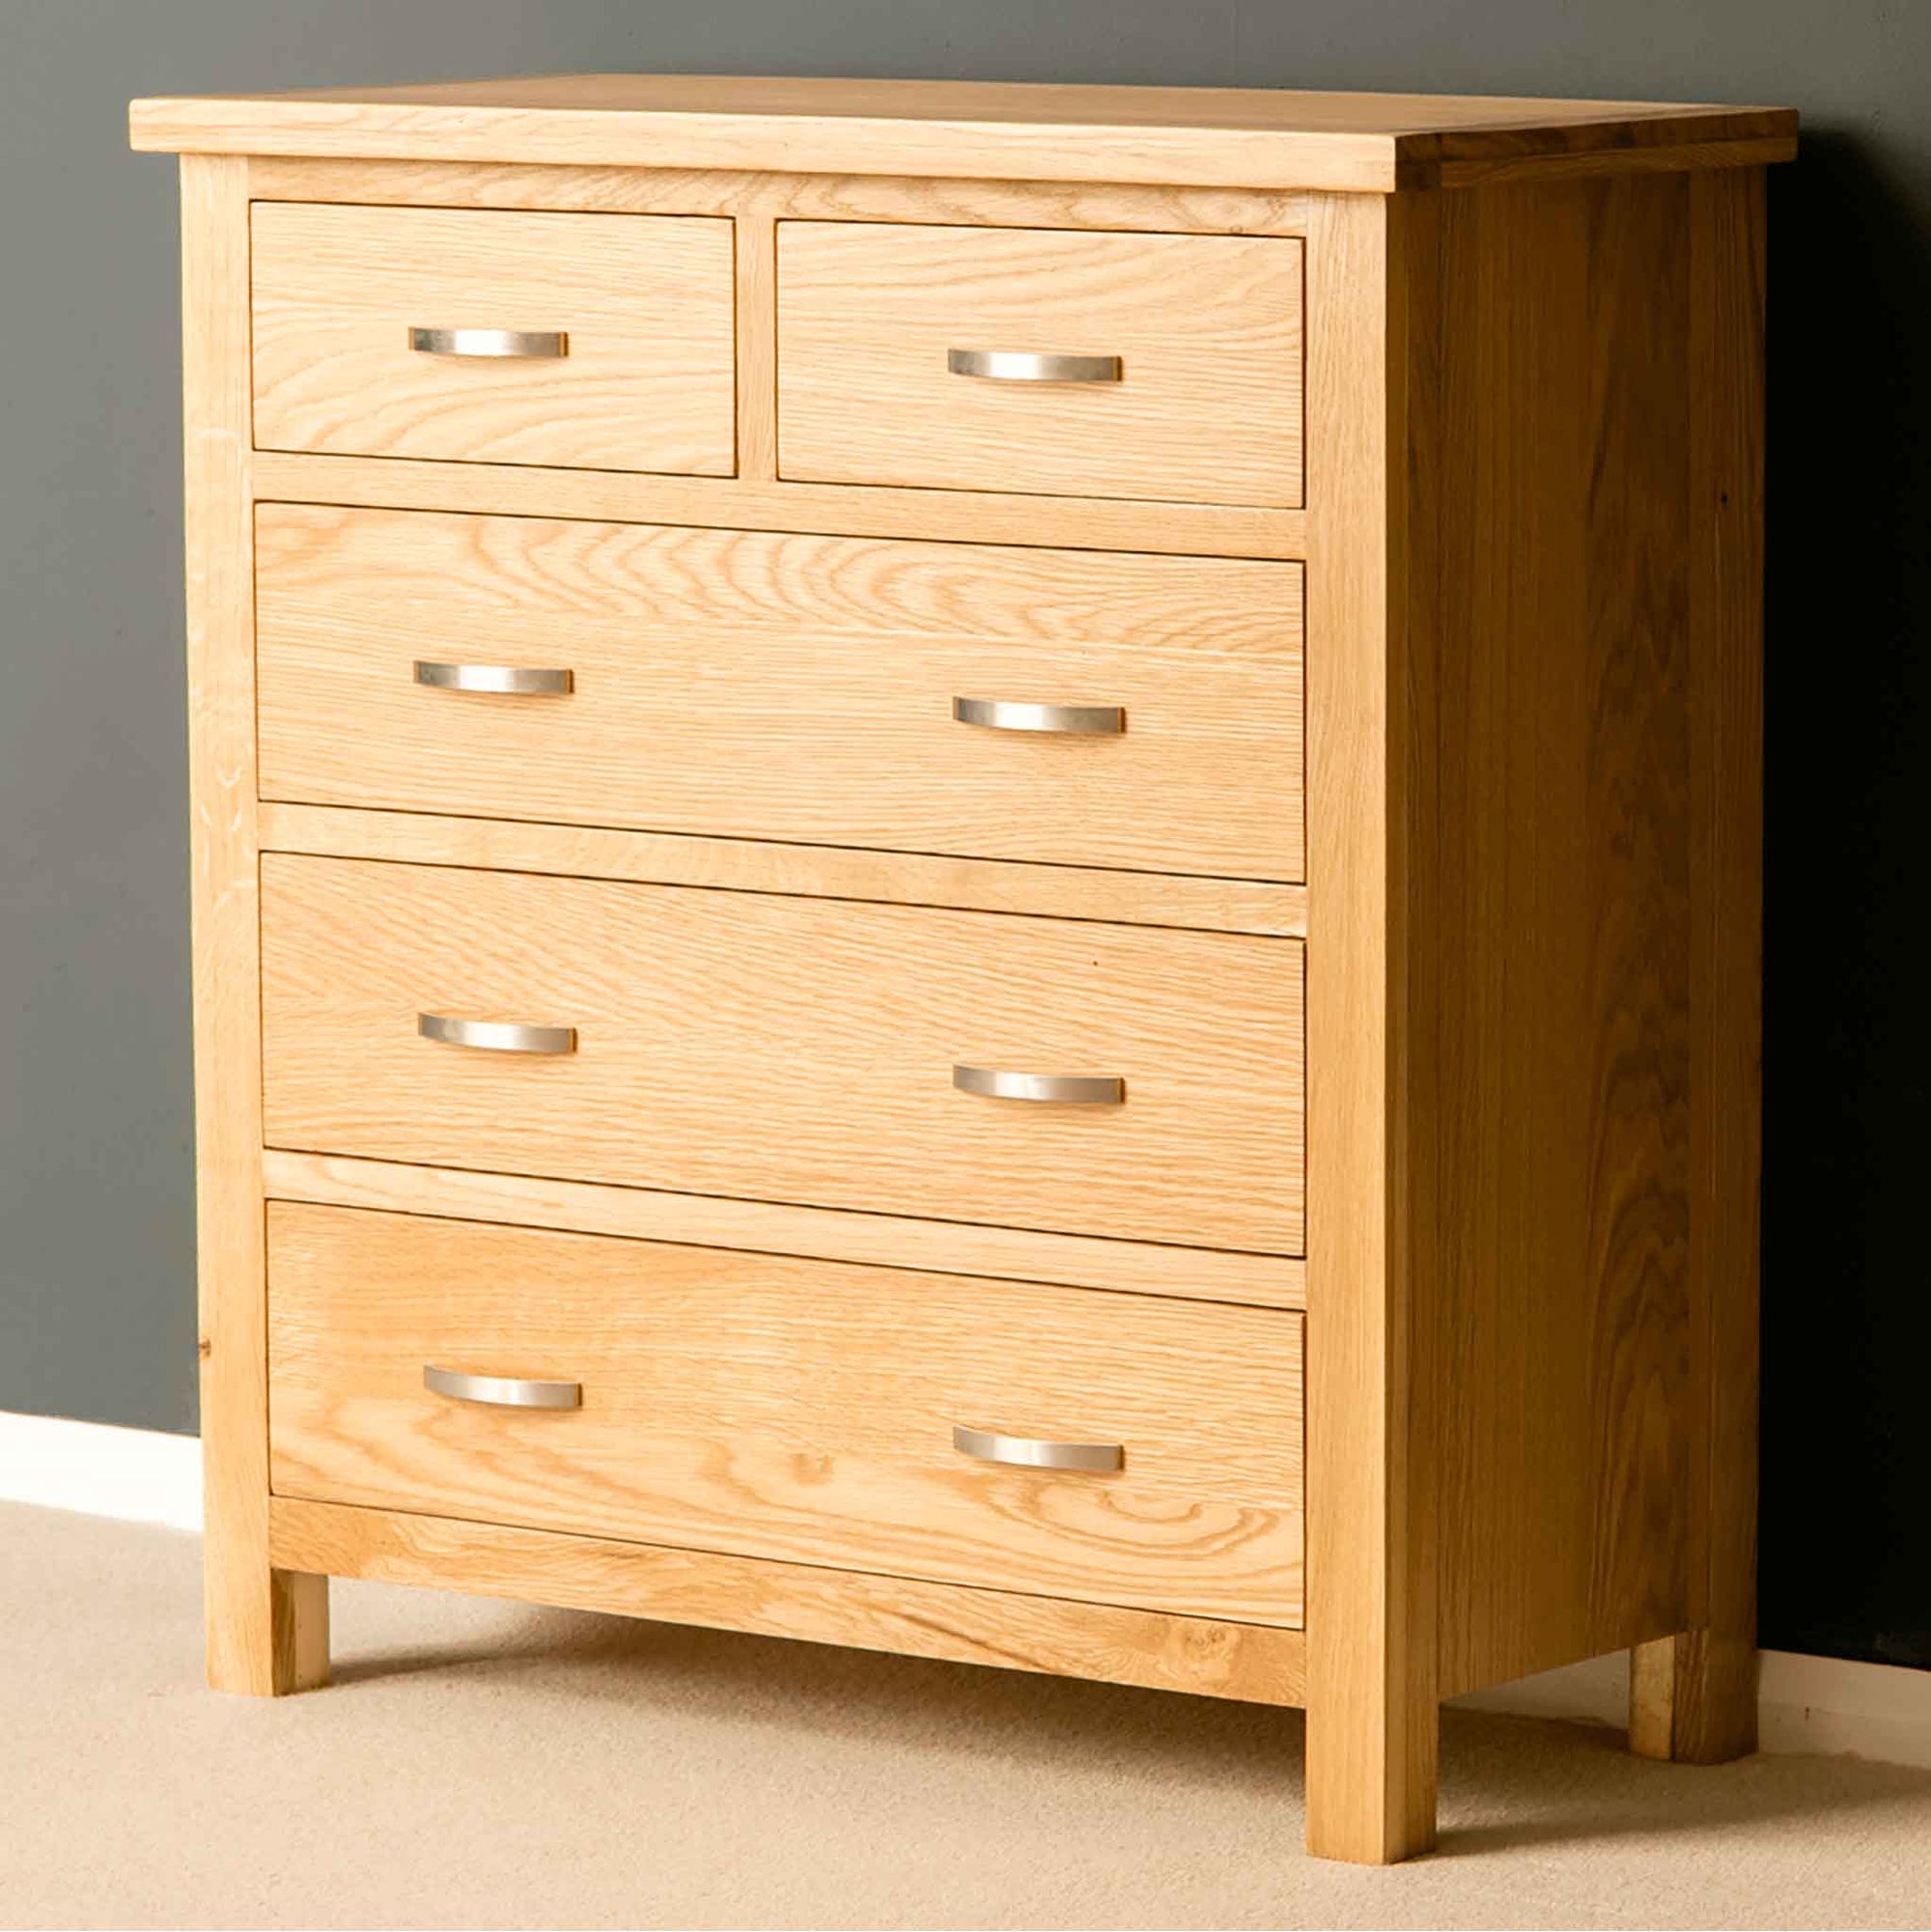 London Oak 2 over 3 Chest of Drawers, 85cm Tall Solid Wooden Bedroom